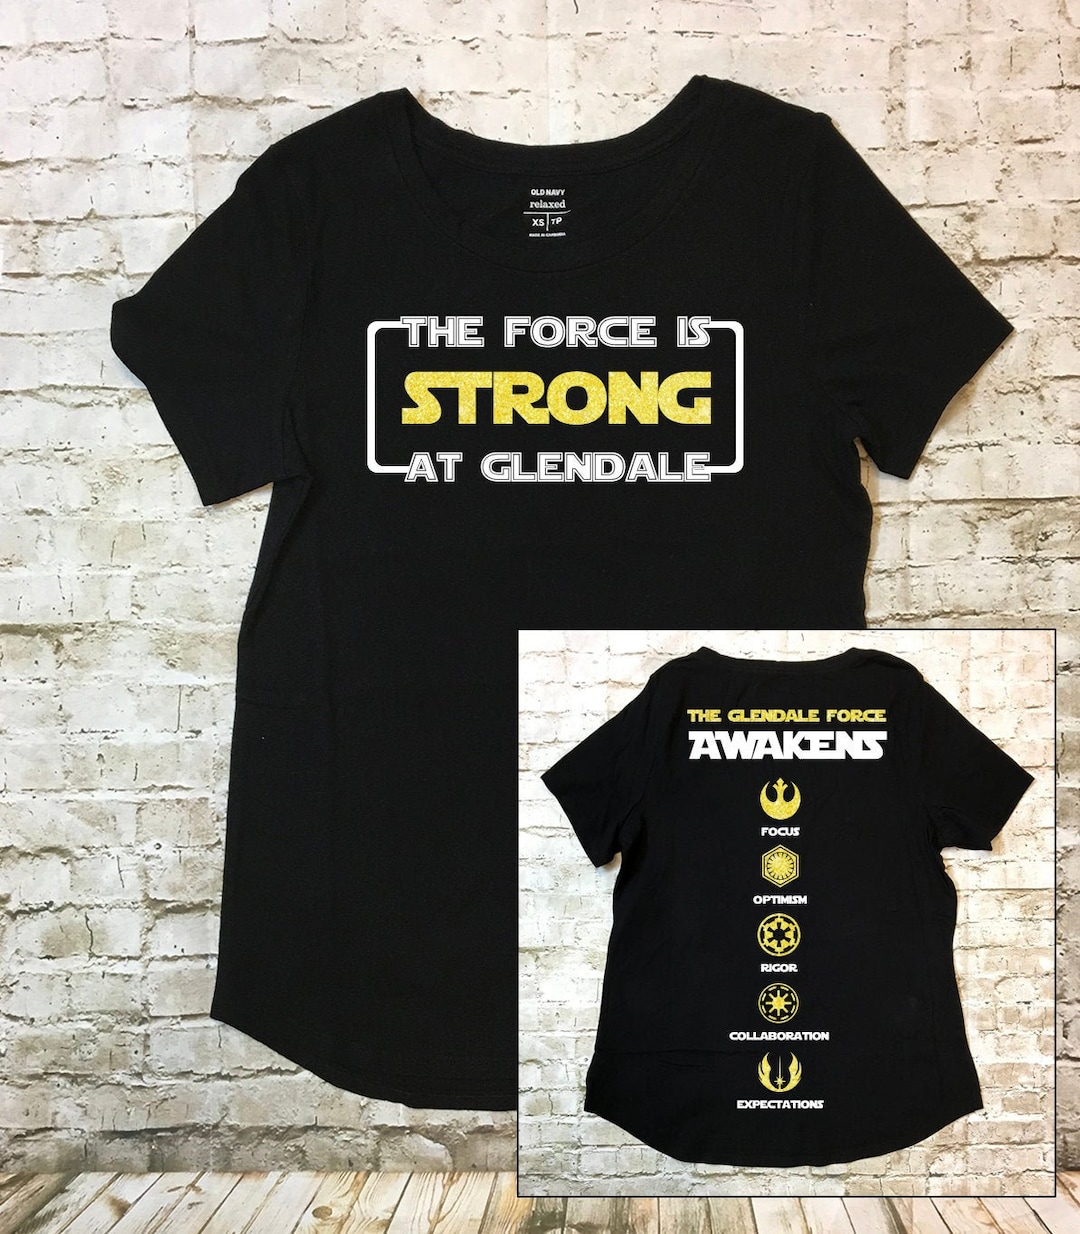 Teacher is Wars Our Shirt at Wars Etsy Star Themed Teacher Star Shirt Team - Wars Teacher School Teacher Strong Star The Themed Force Shirt